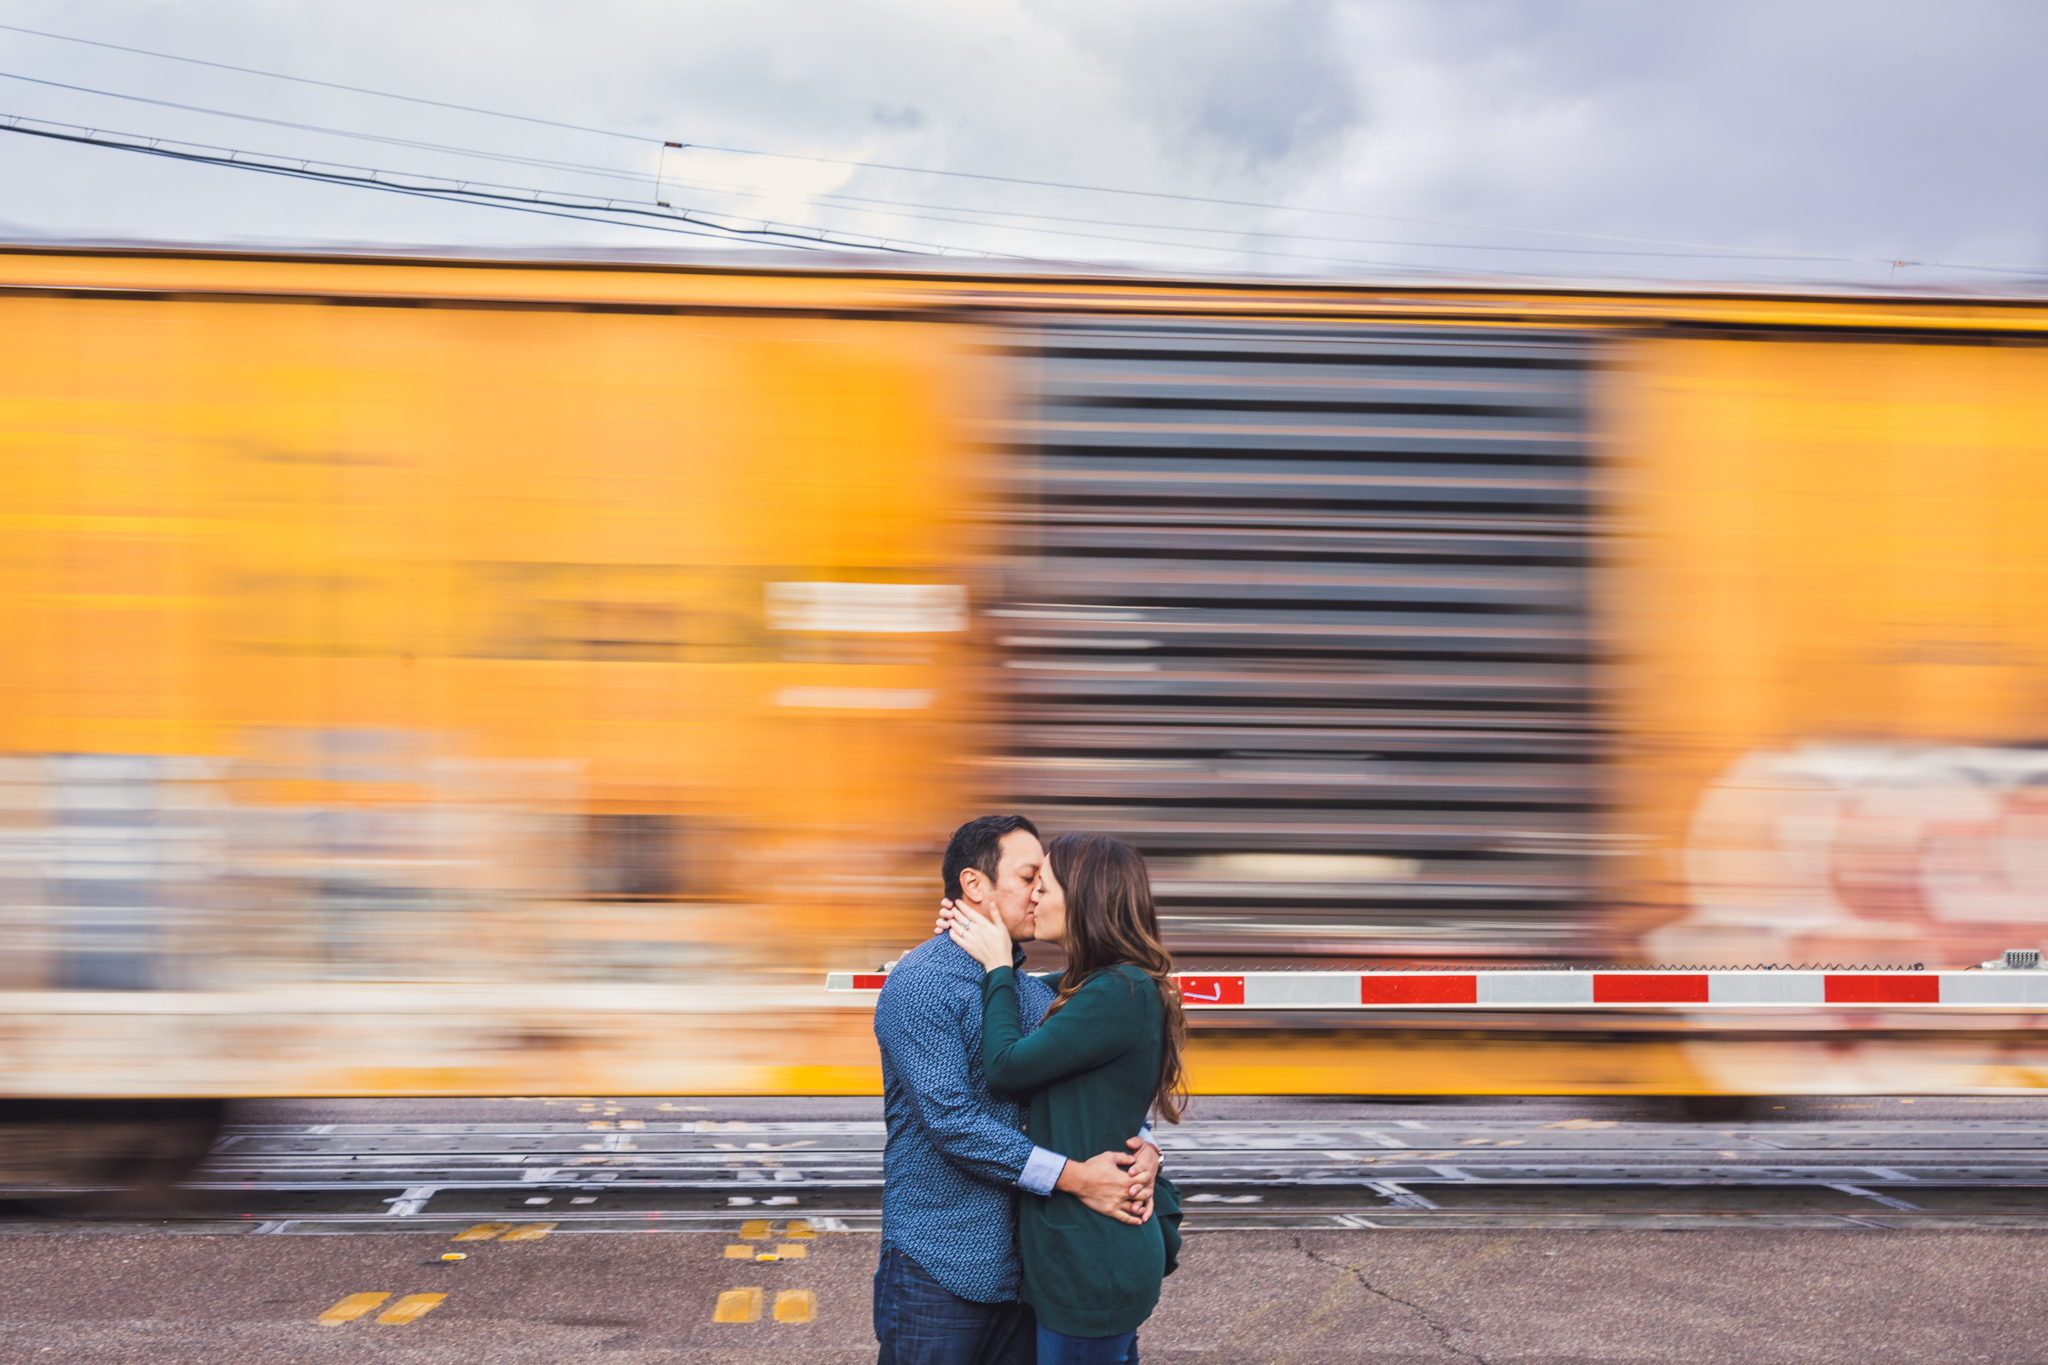 Location: Downtown Tucson, AZThis couple wanted a train track photo, but we knew we didn't want to make the same old train track photo that's been done a million times. I came up with the idea to use a moving train and I love how it turned out. I lo…